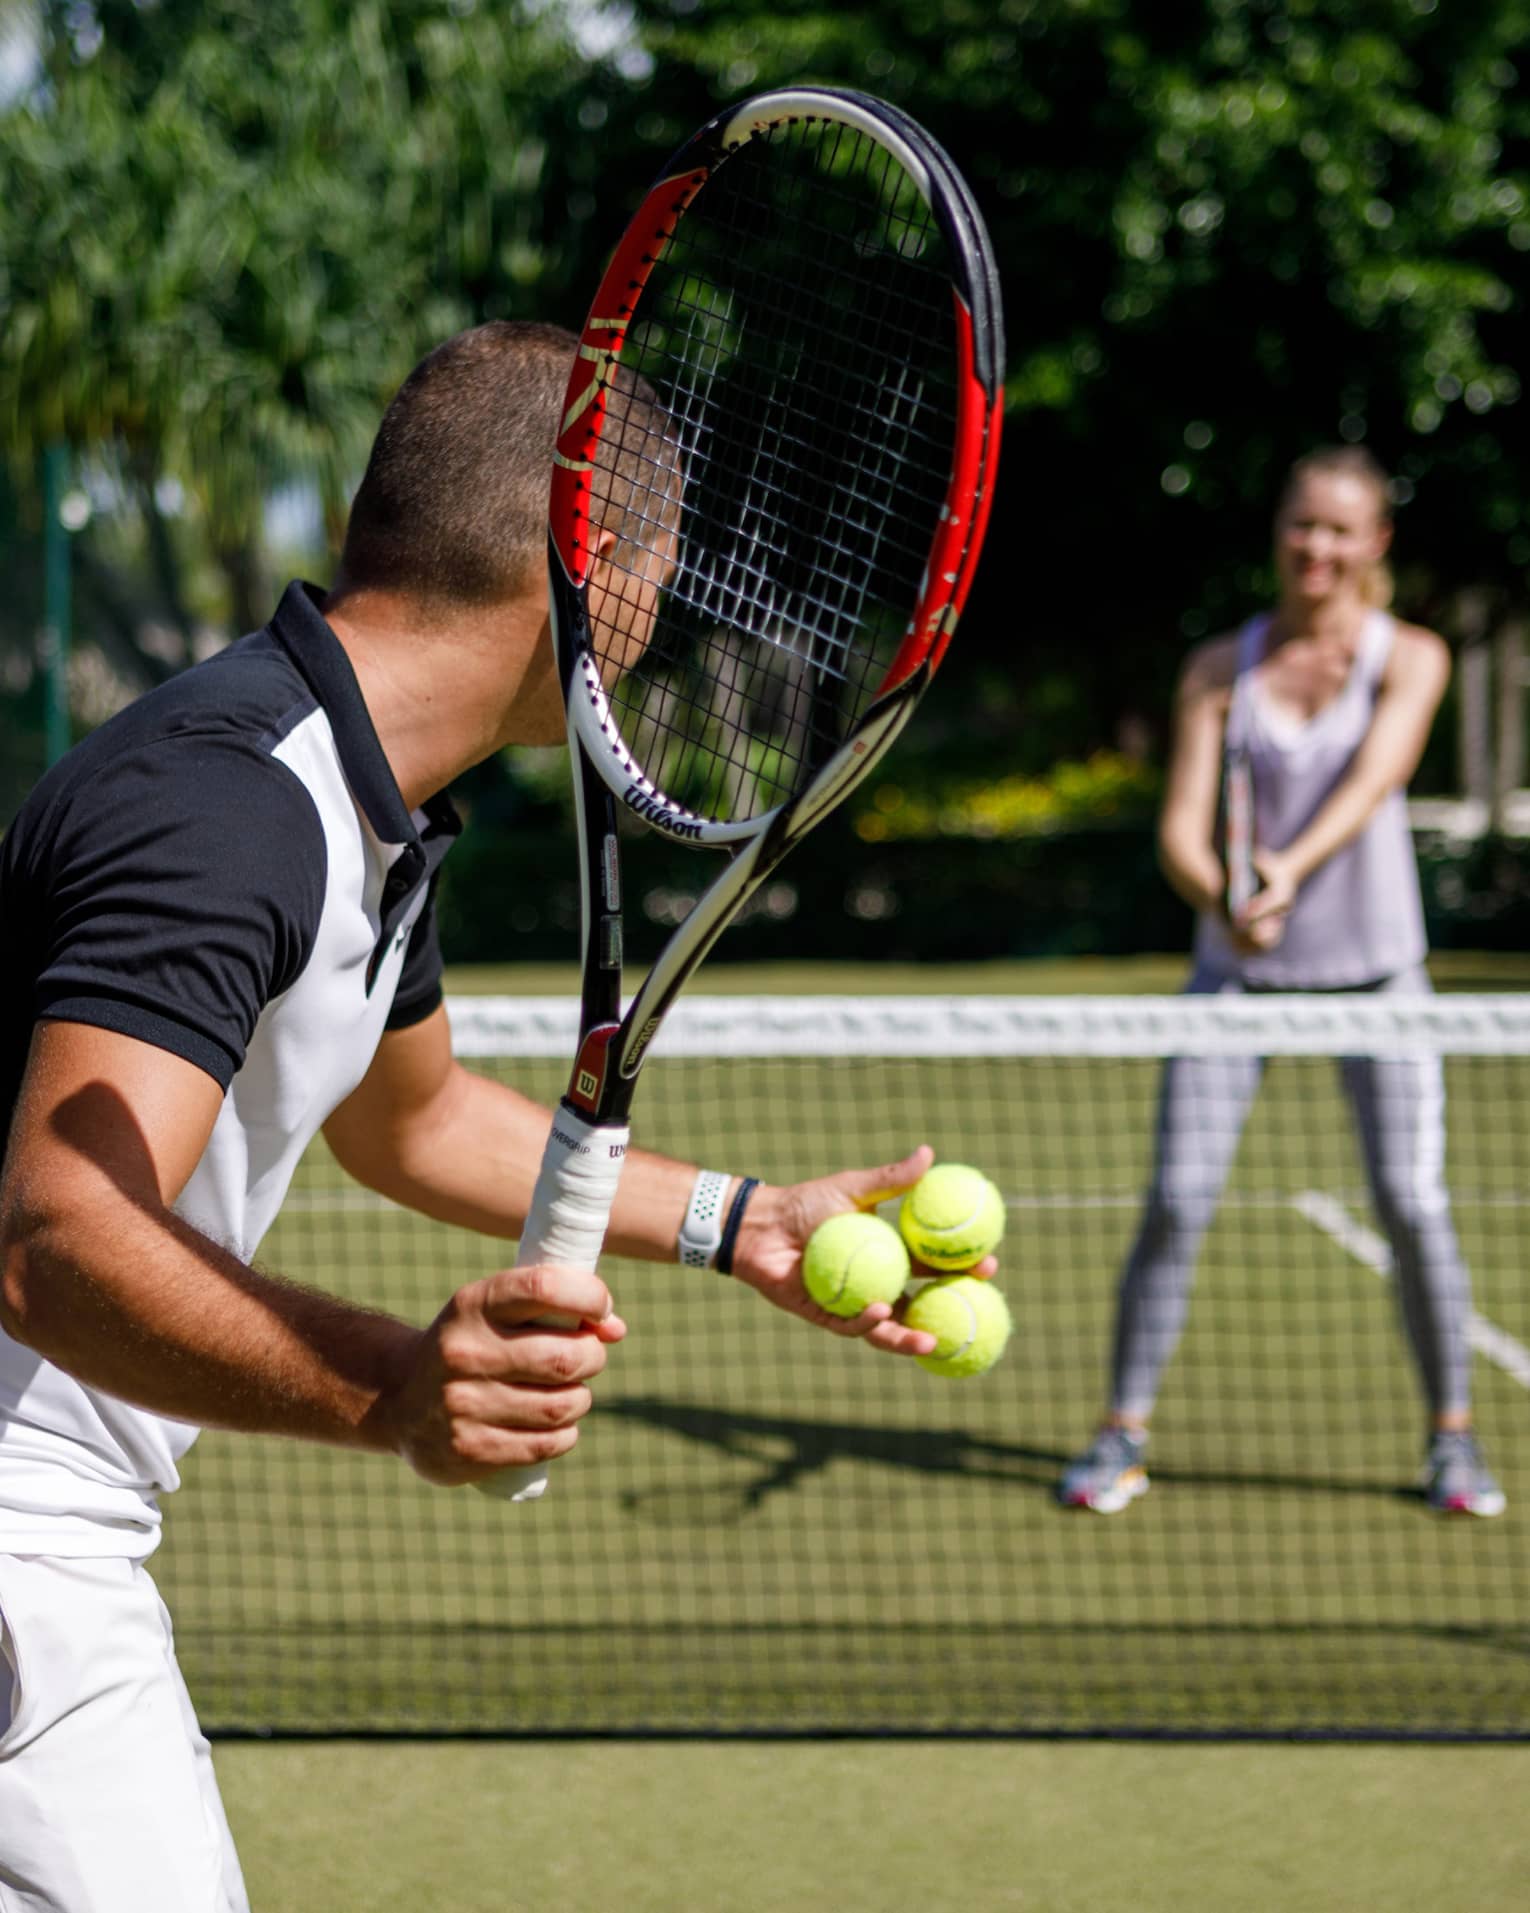 Couple playing tennis on court, man prepares to serve tennis balls to woman ready to swing